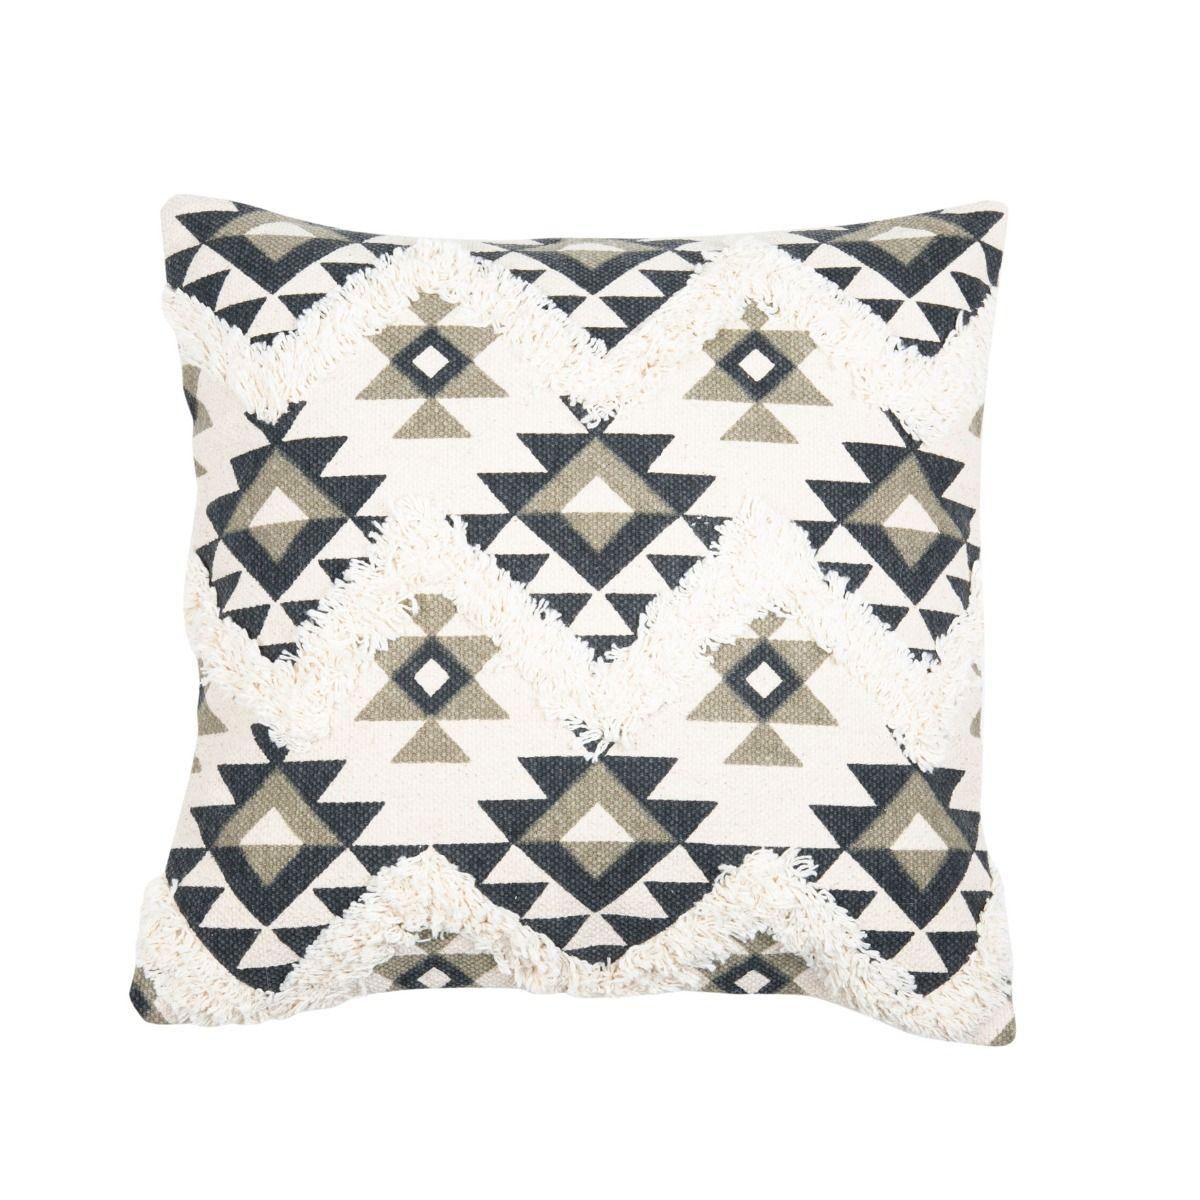 Equilateral Cushion Cover - Living Shapes